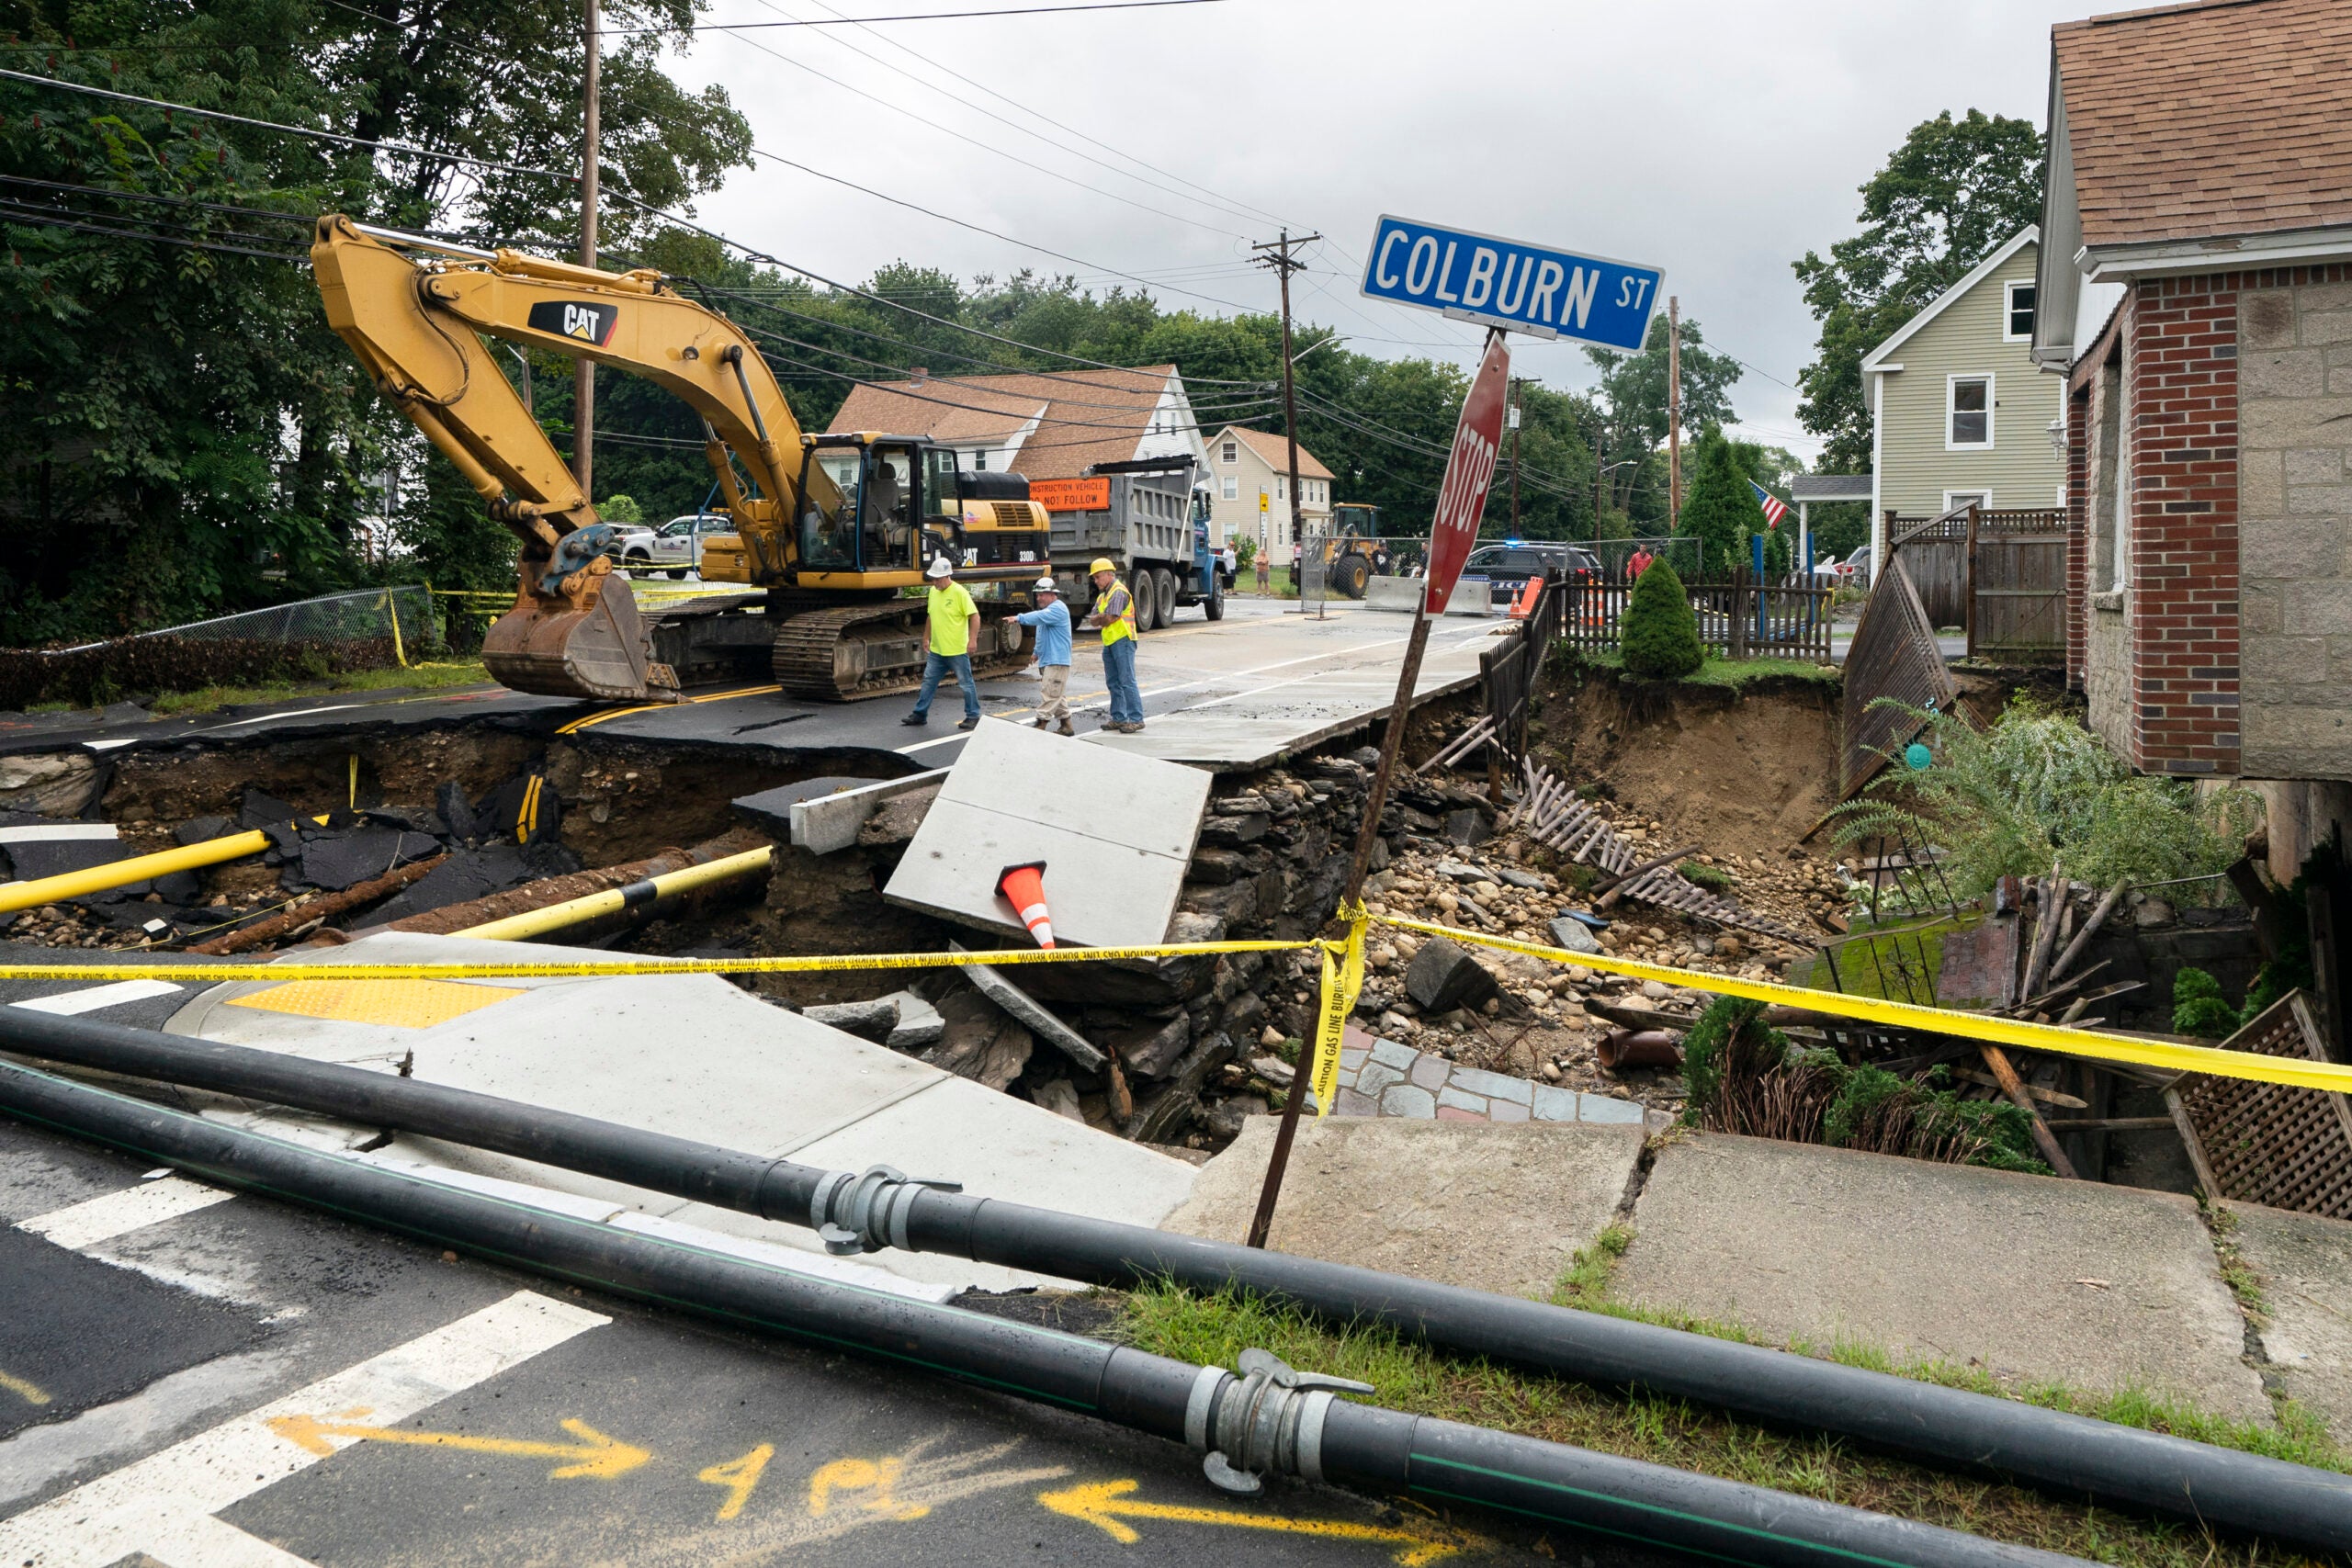 Public works officials examine the damage to a road and front yard that was washed away by recent flooding.